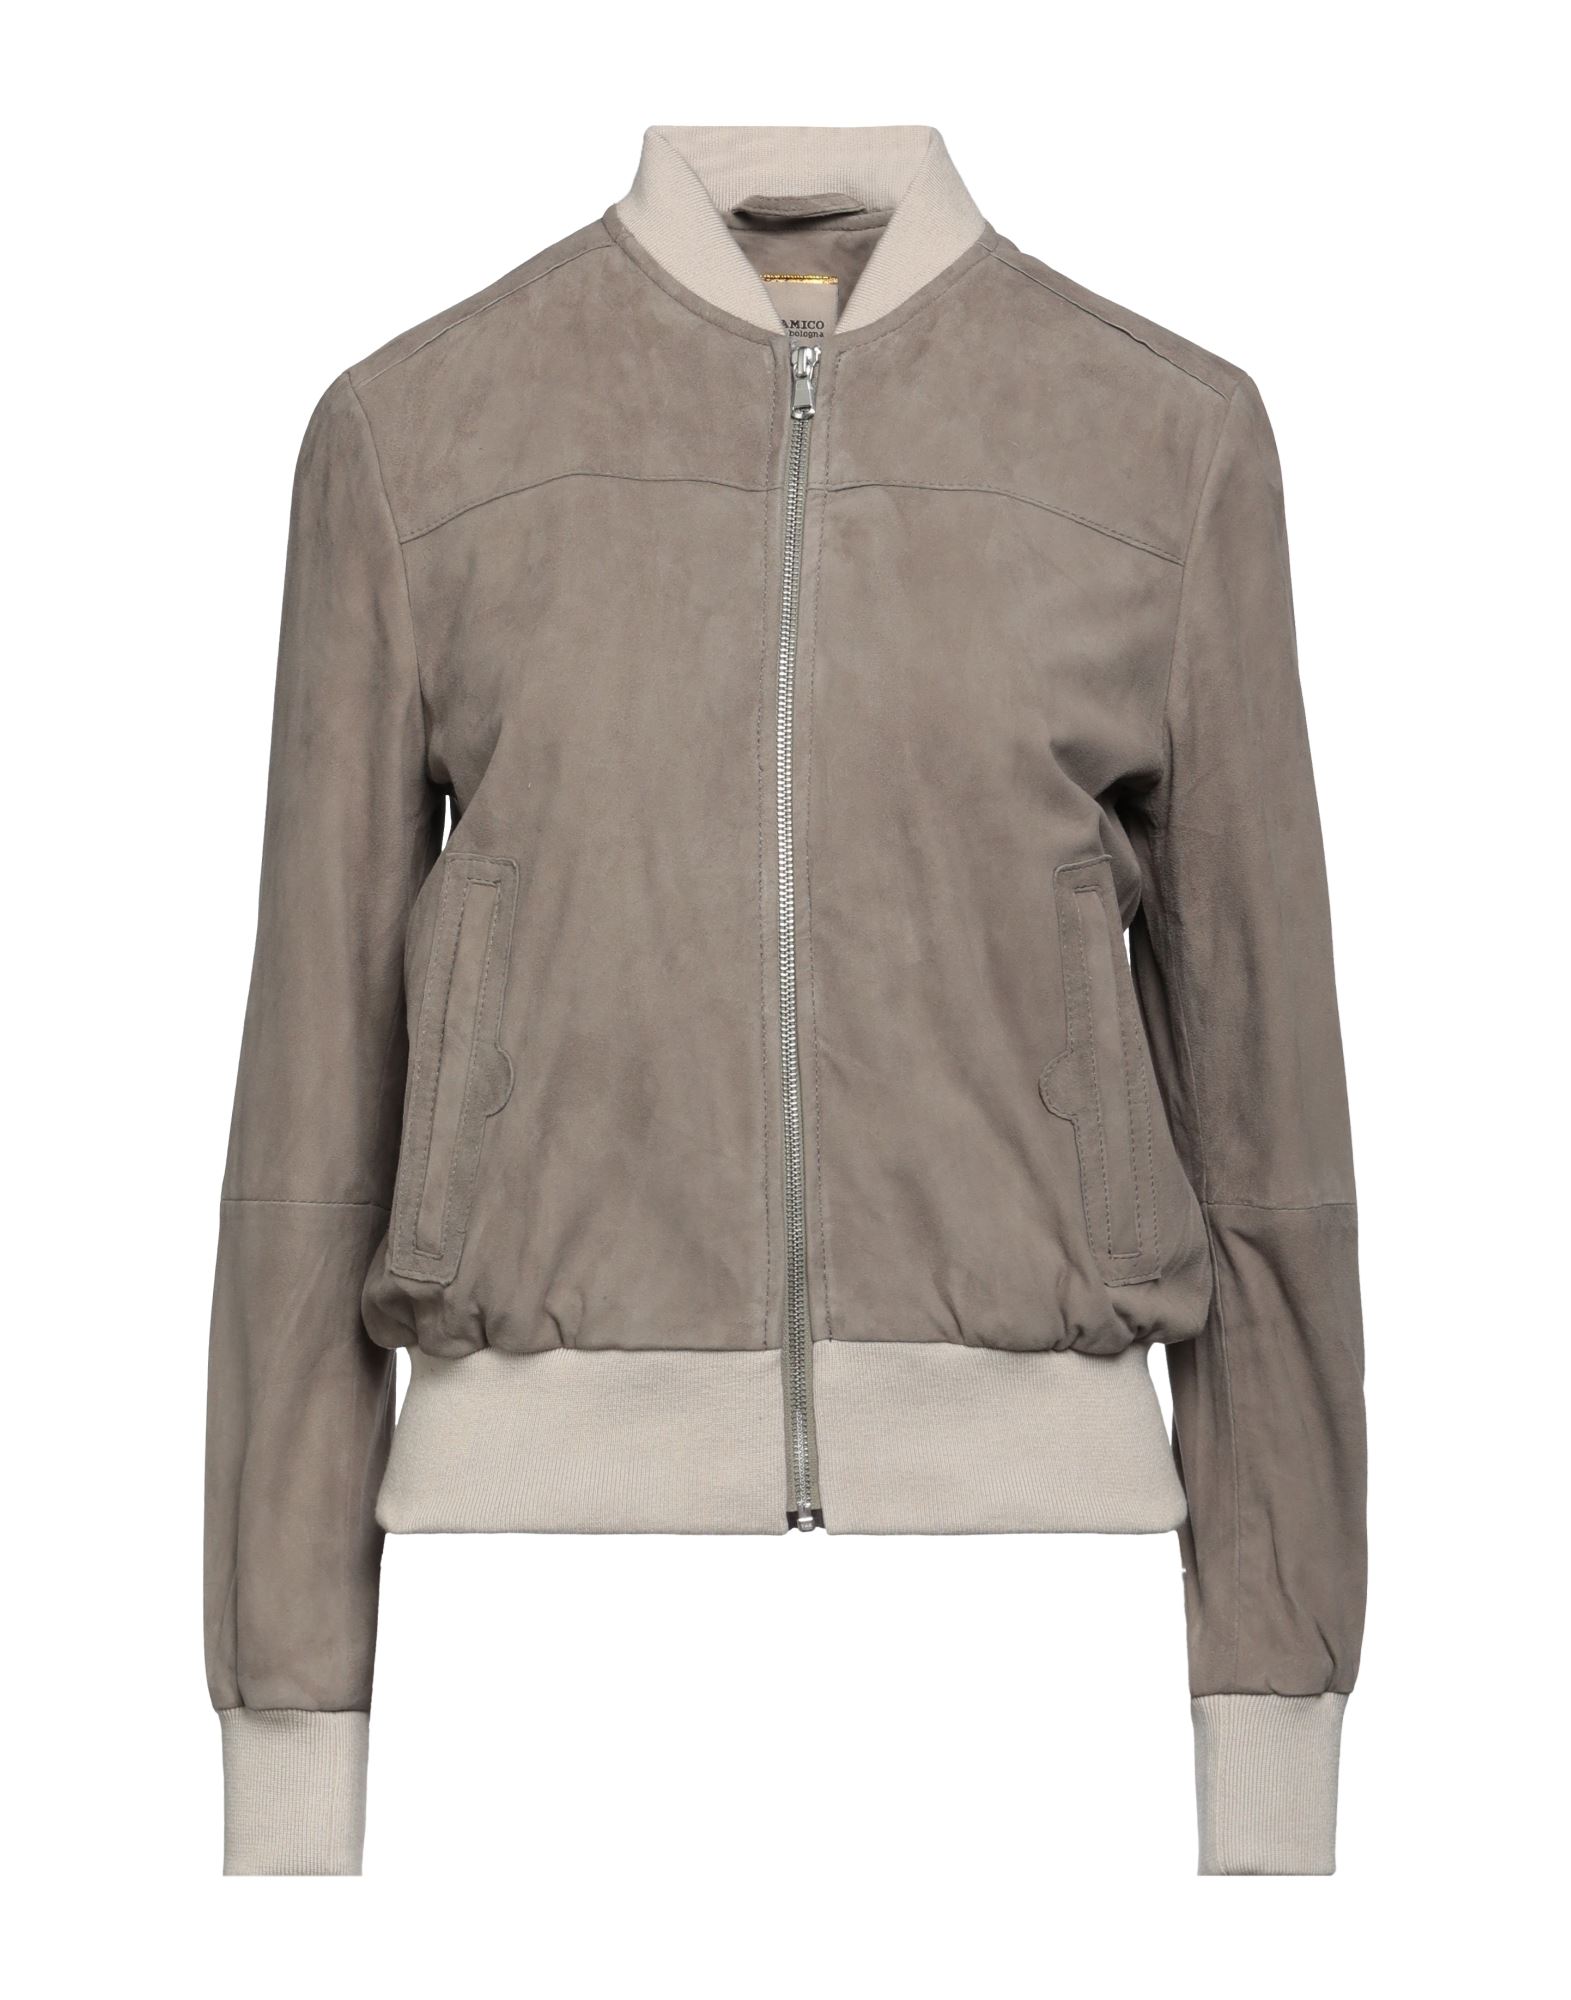 Andrea D'amico Woman Jacket Khaki Size 10 Soft Leather In Beige